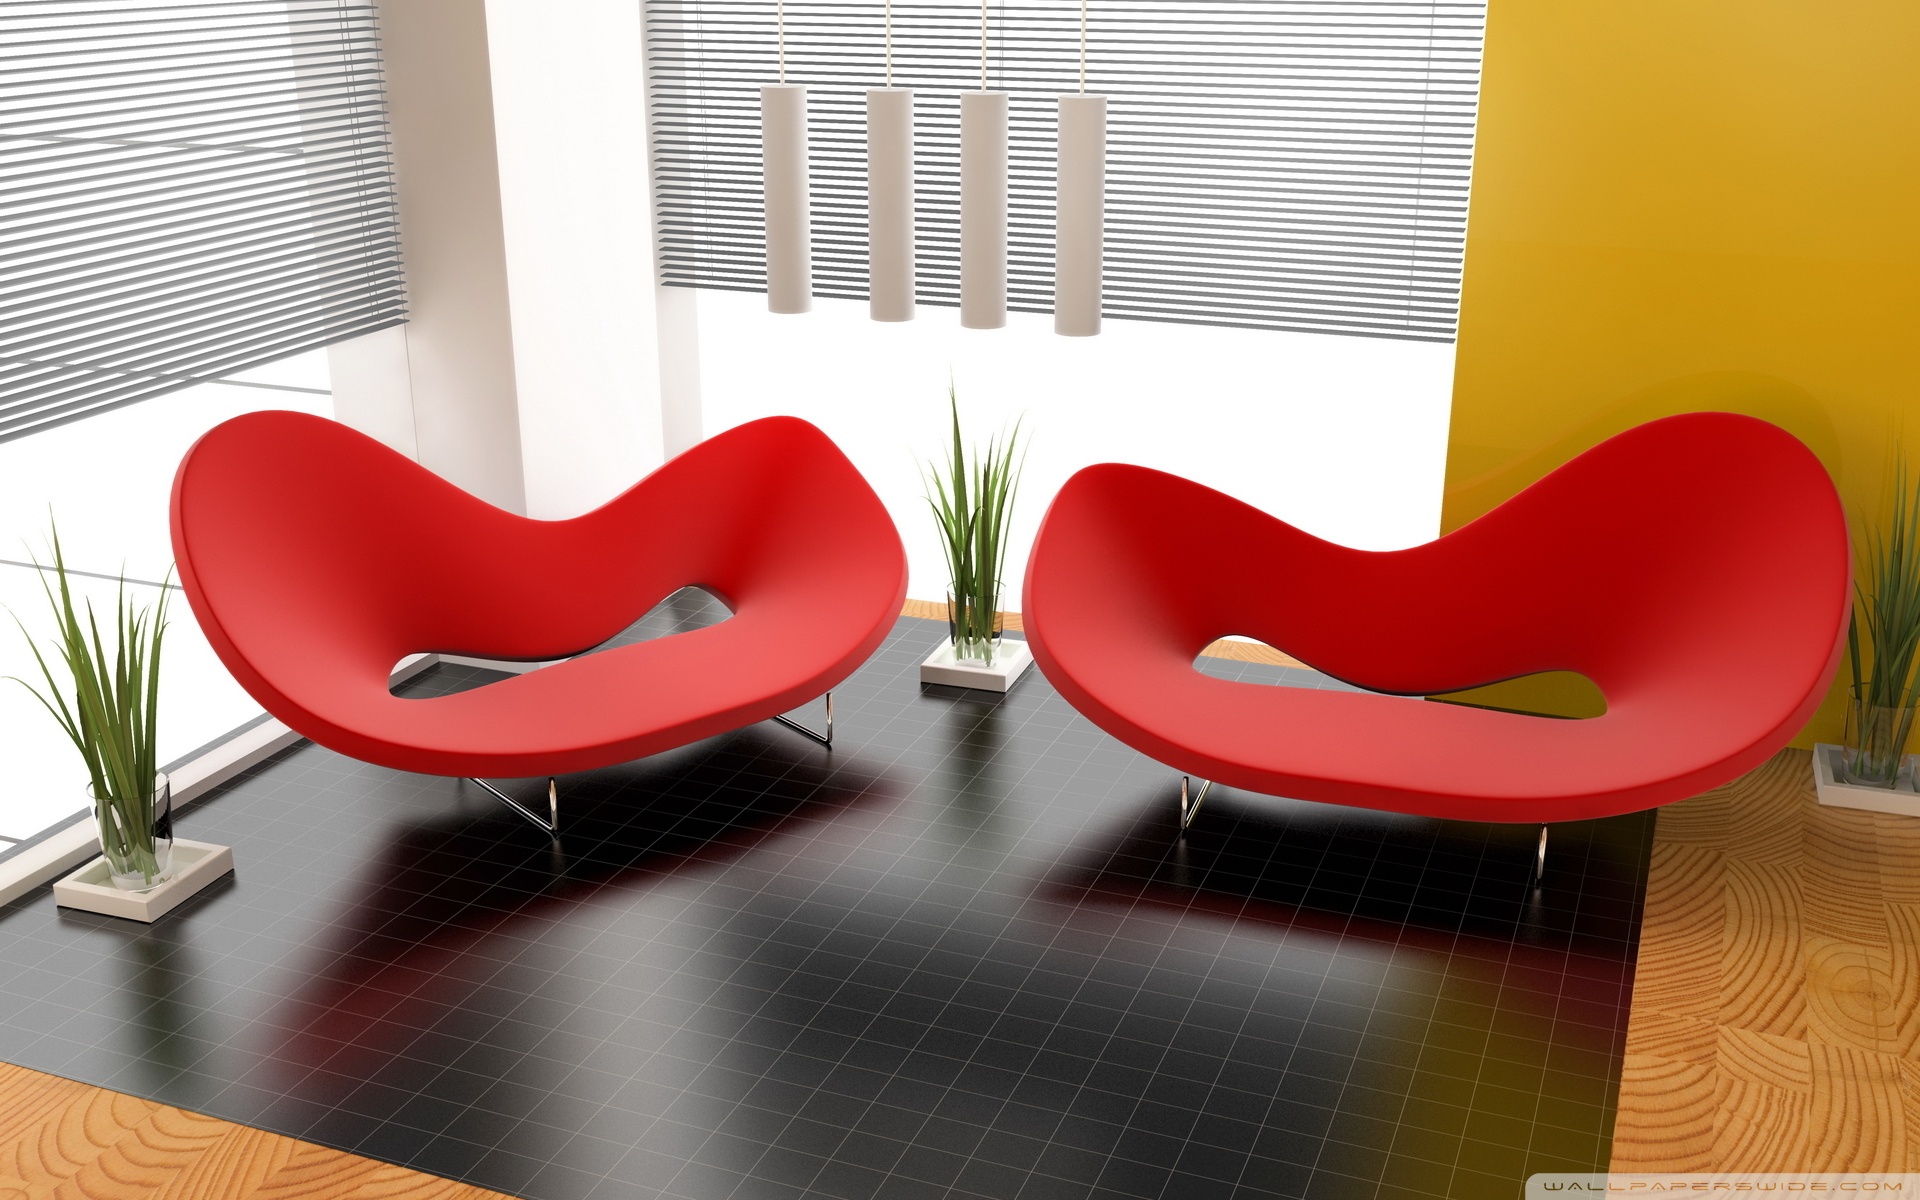 Abstract Form In Interior Design - HD Wallpaper 